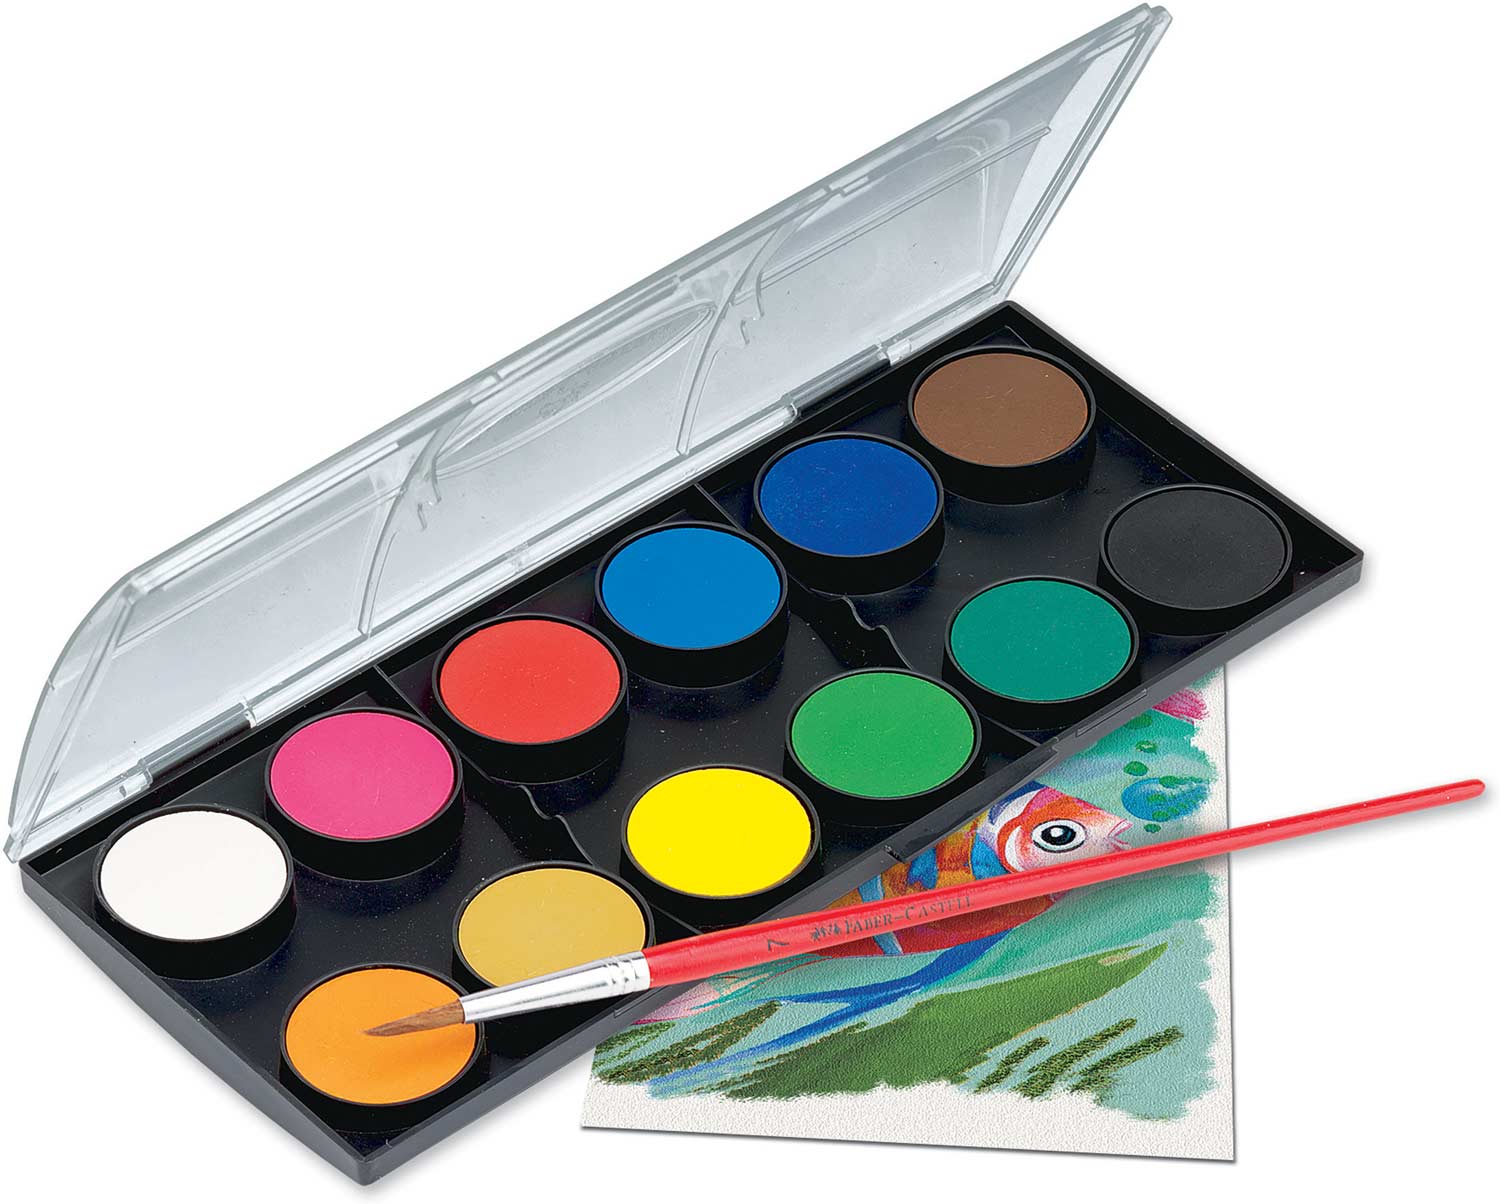 Faber Castell How to Rainbow Watercolor Pencils Starter Set